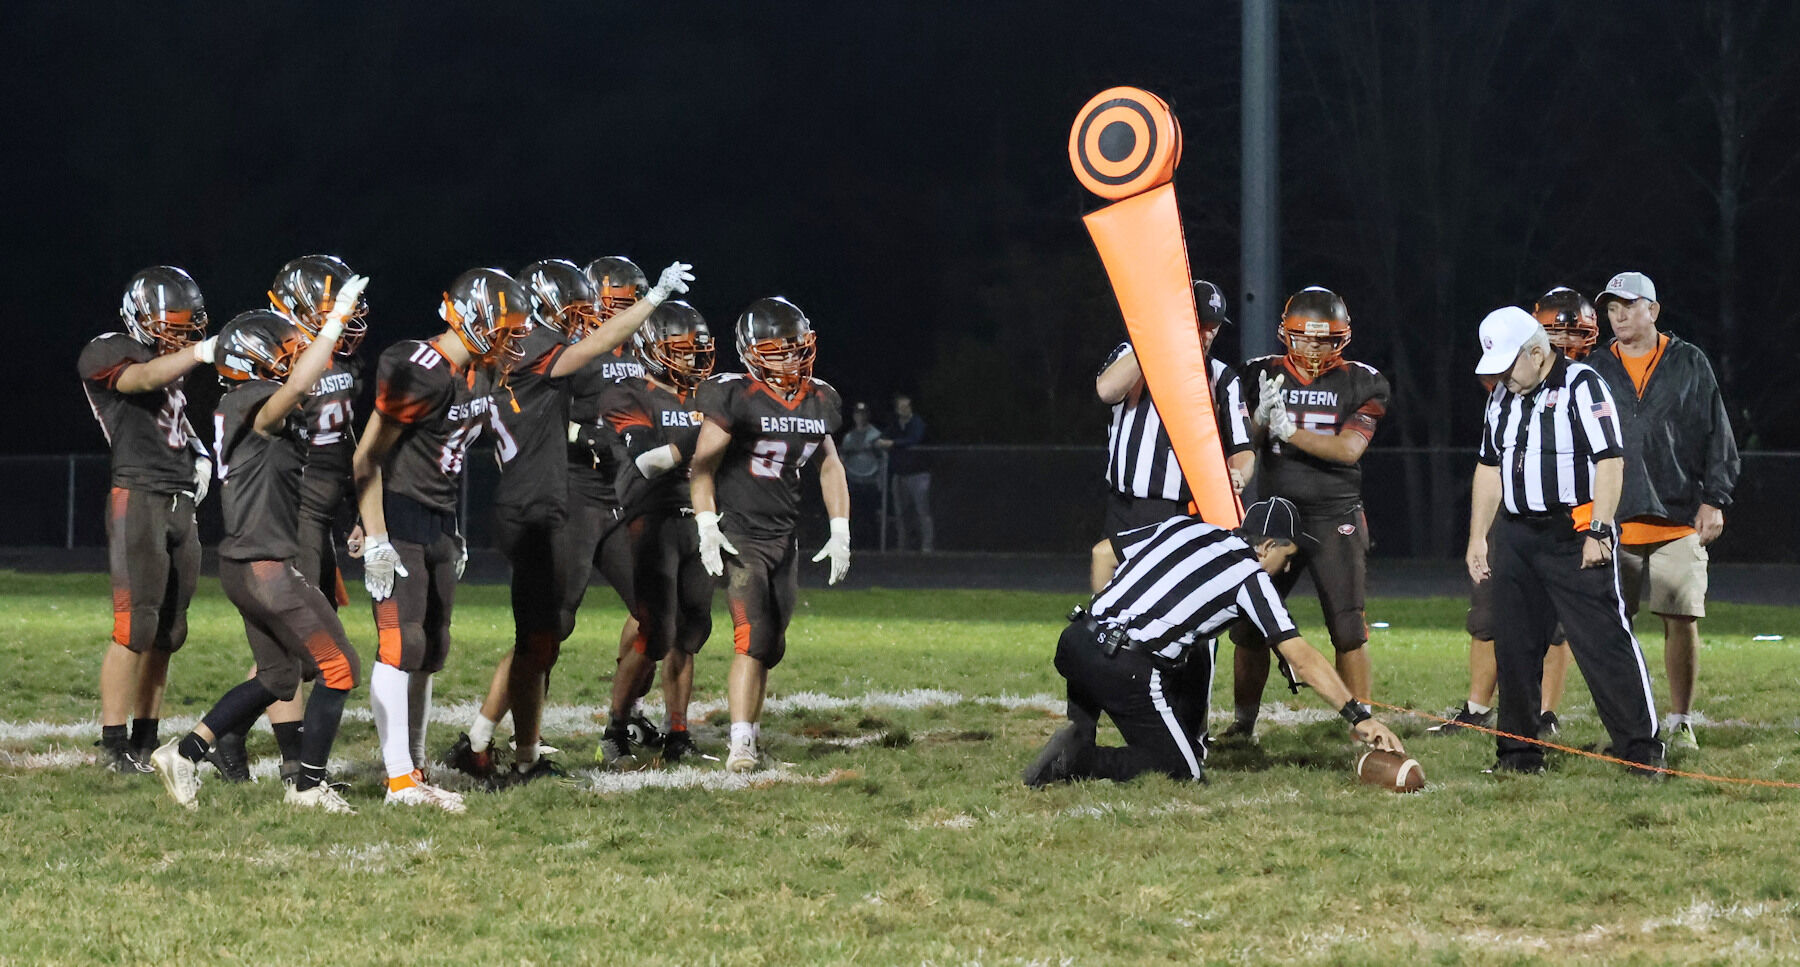 Eagles secure first ever football playoff victory